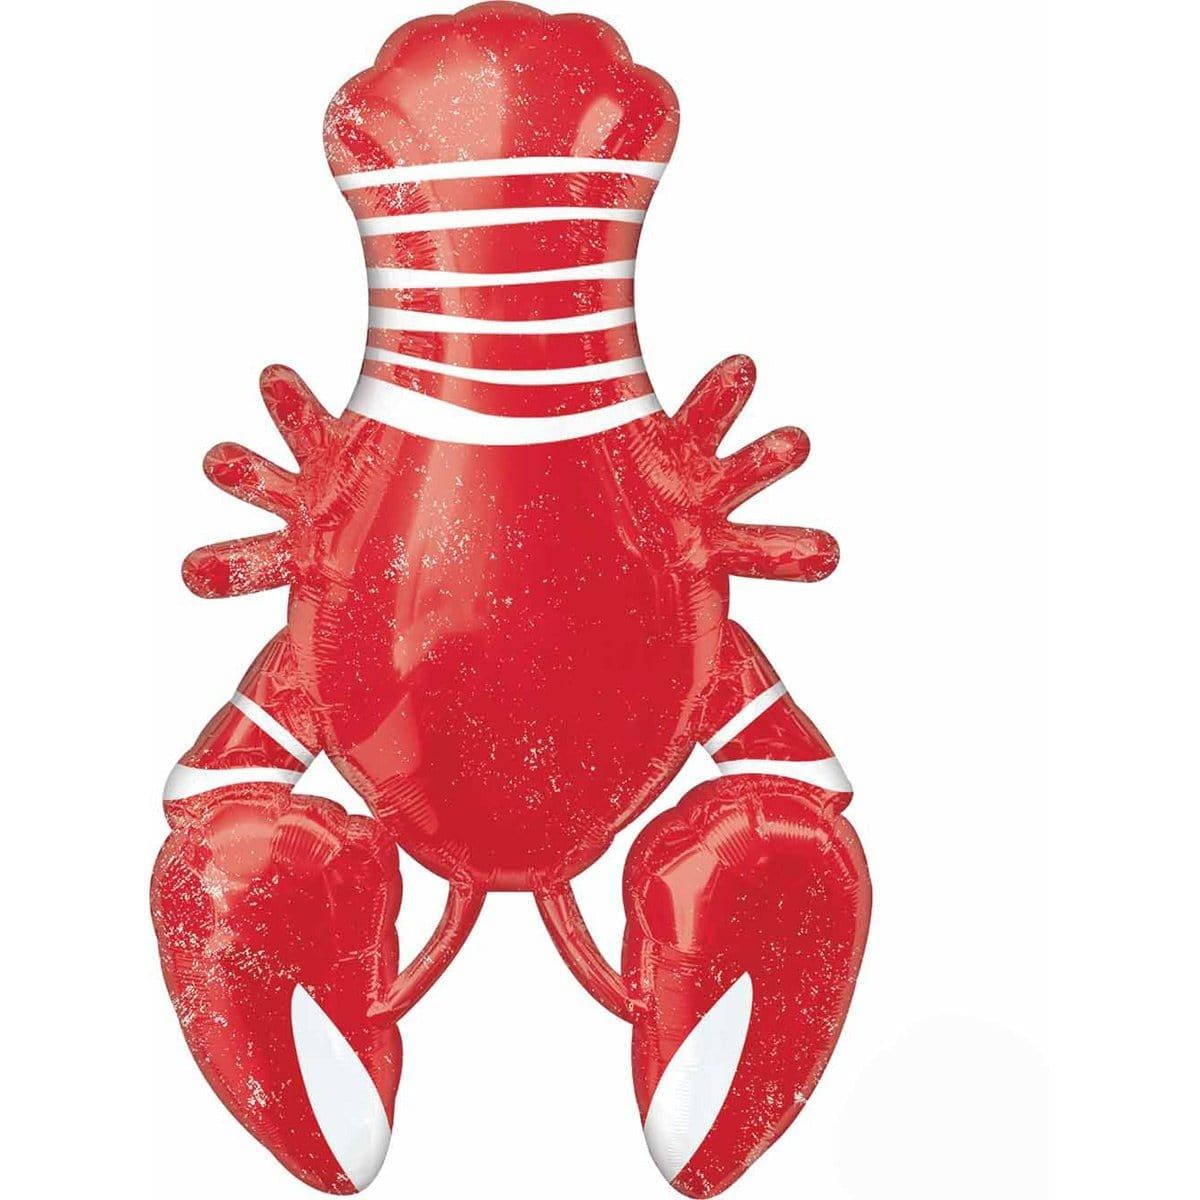 Buy Balloons Lobster Supershape Foil Balloon sold at Party Expert